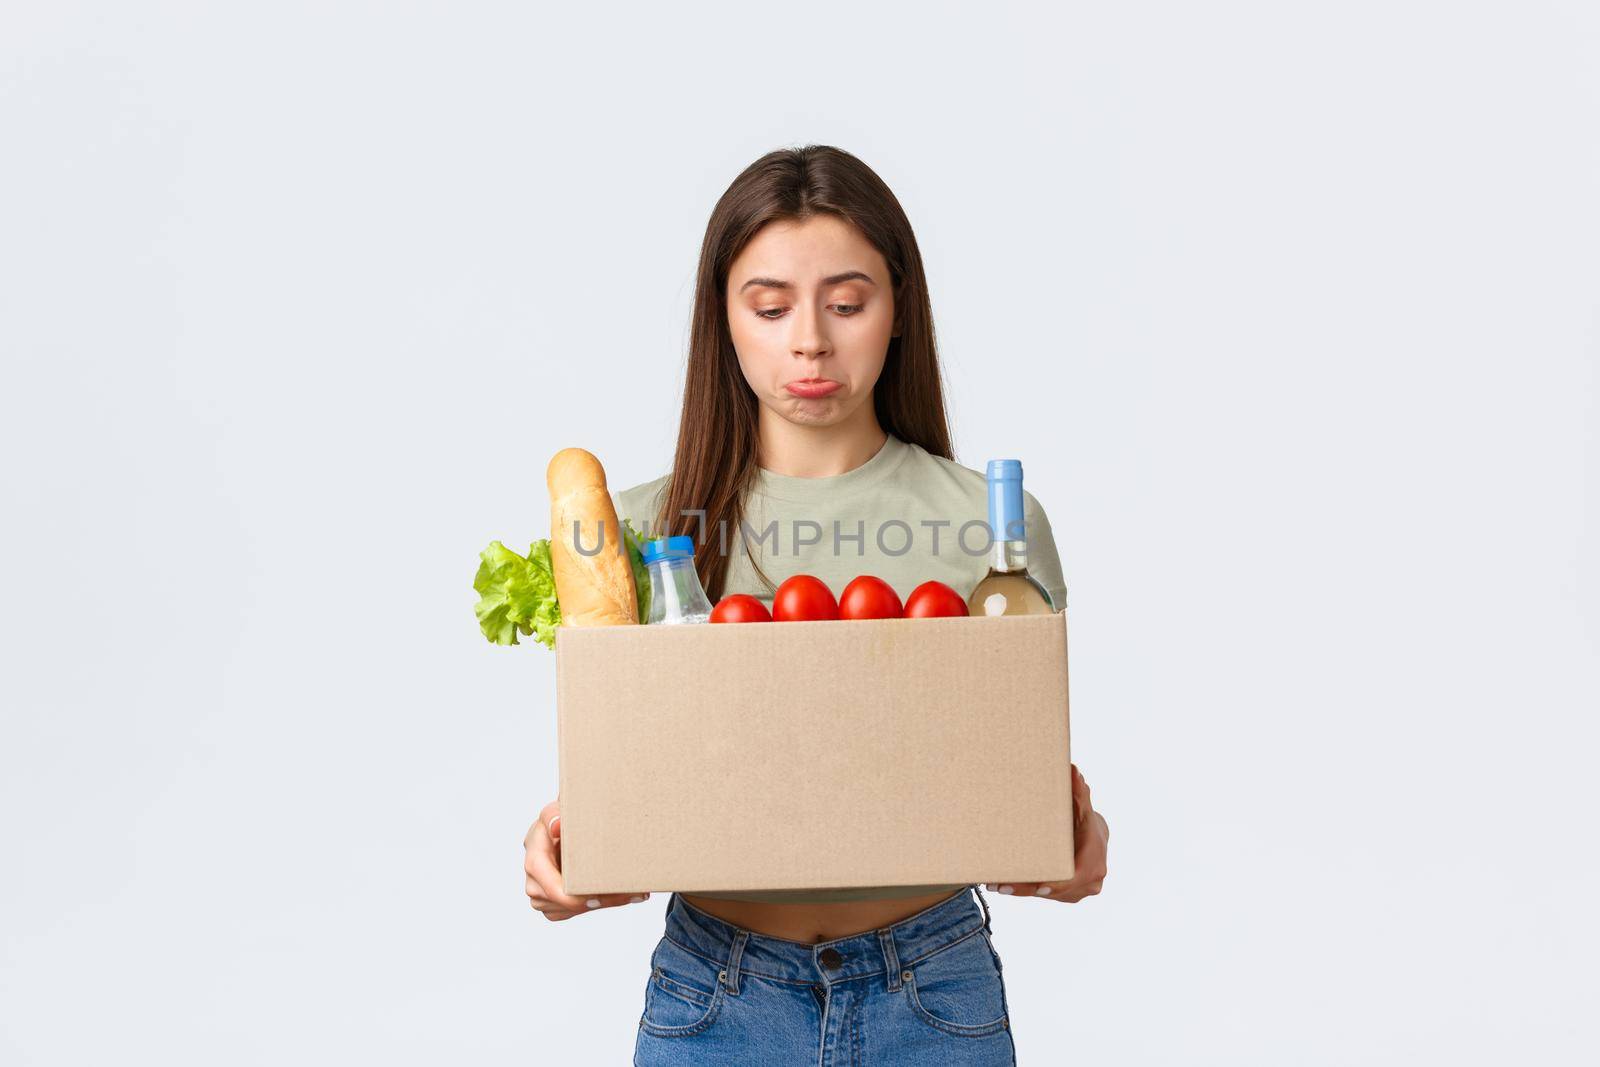 Online home delivery, internet orders and grocery shopping concept. Disappointed female customer receive wrong order of groceries, looking upset inside box and pouting, stand white background.